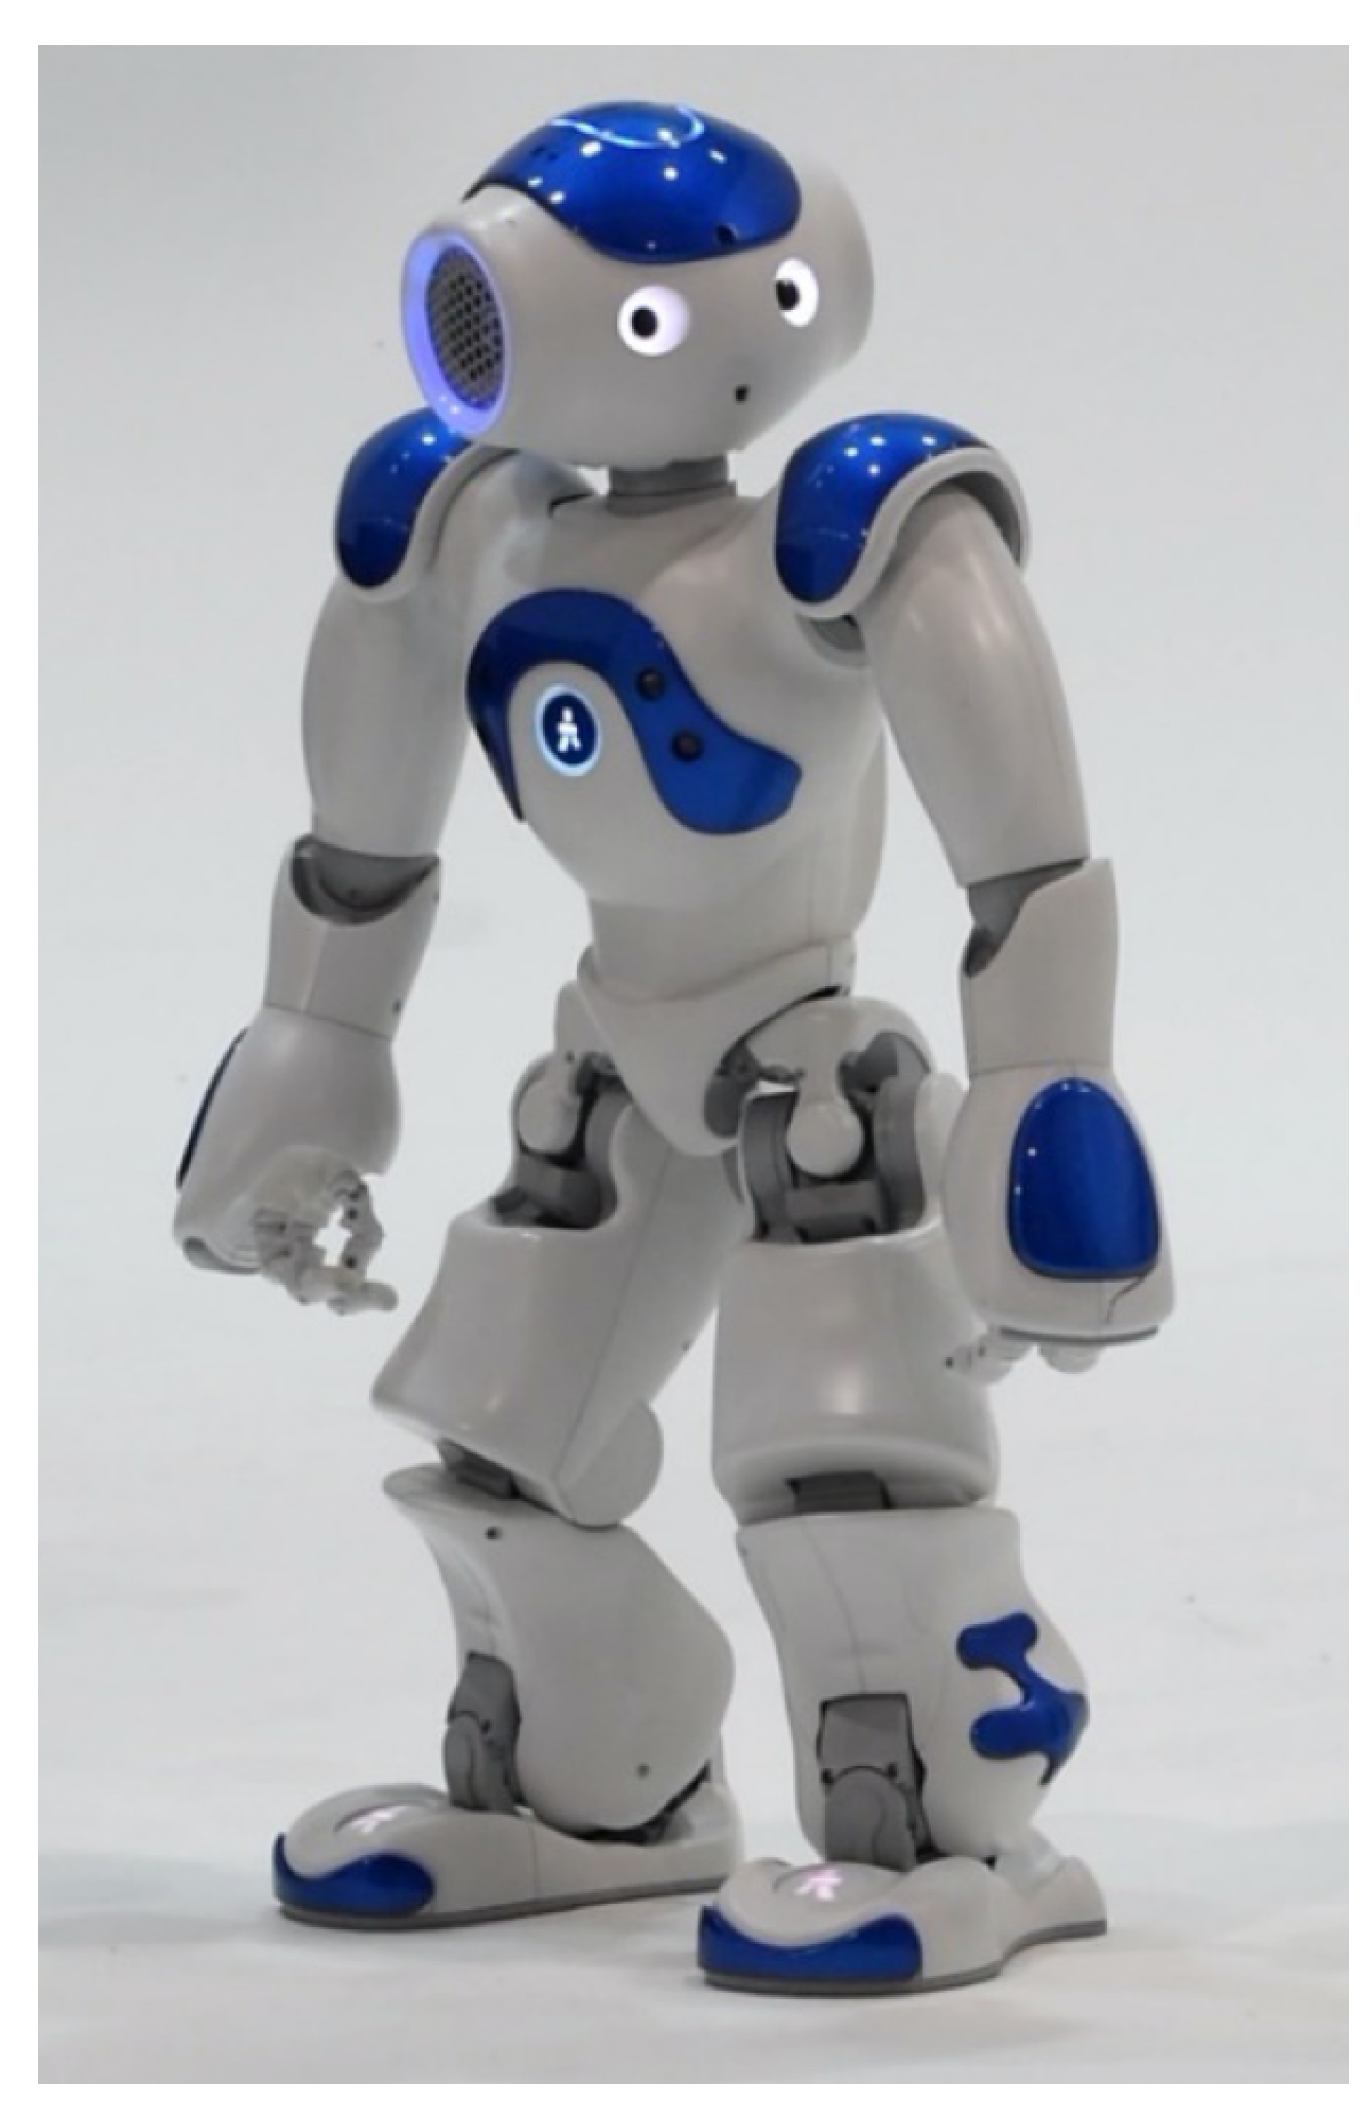 Sensors | Free Full-Text | Socially-Assistive Robots to Support Learning in Students on the Autism Spectrum: Investigating Educator Perspectives and Pilot Trial of a Mobile Platform to Remove Barriers to Implementation